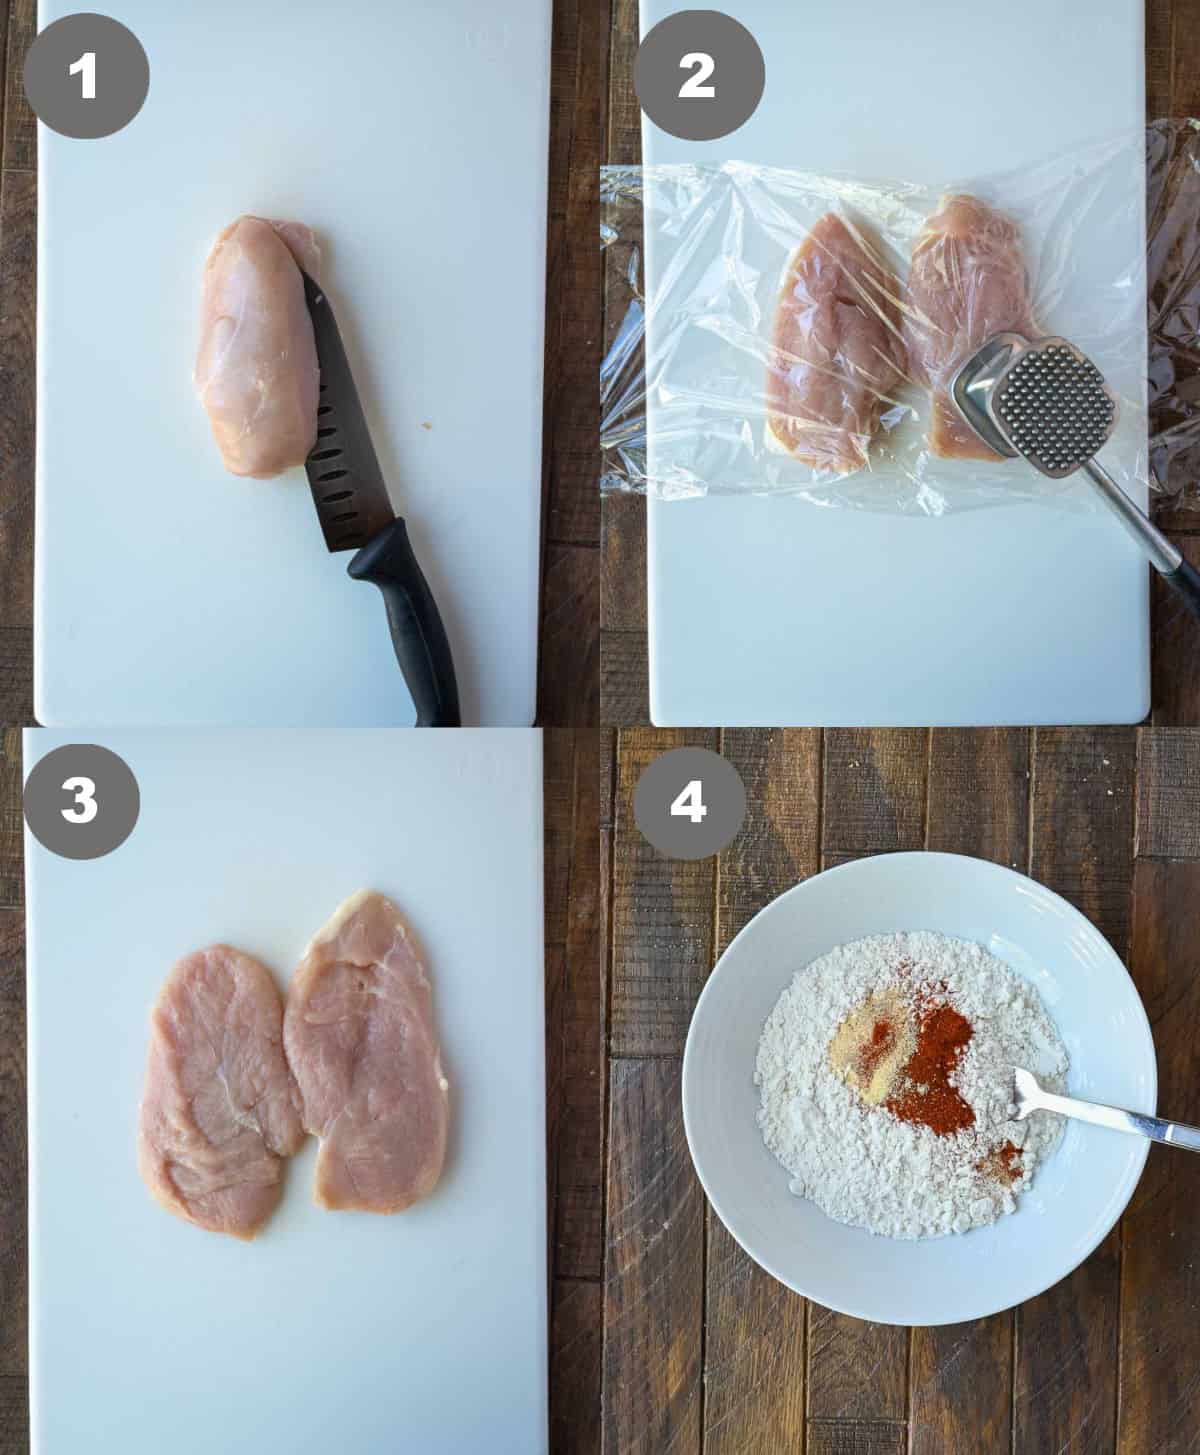 Chicken breast on a cutting board with a knife slicing in half and pounding it out with a mallet. Then a shallow bowl with flour and spices.